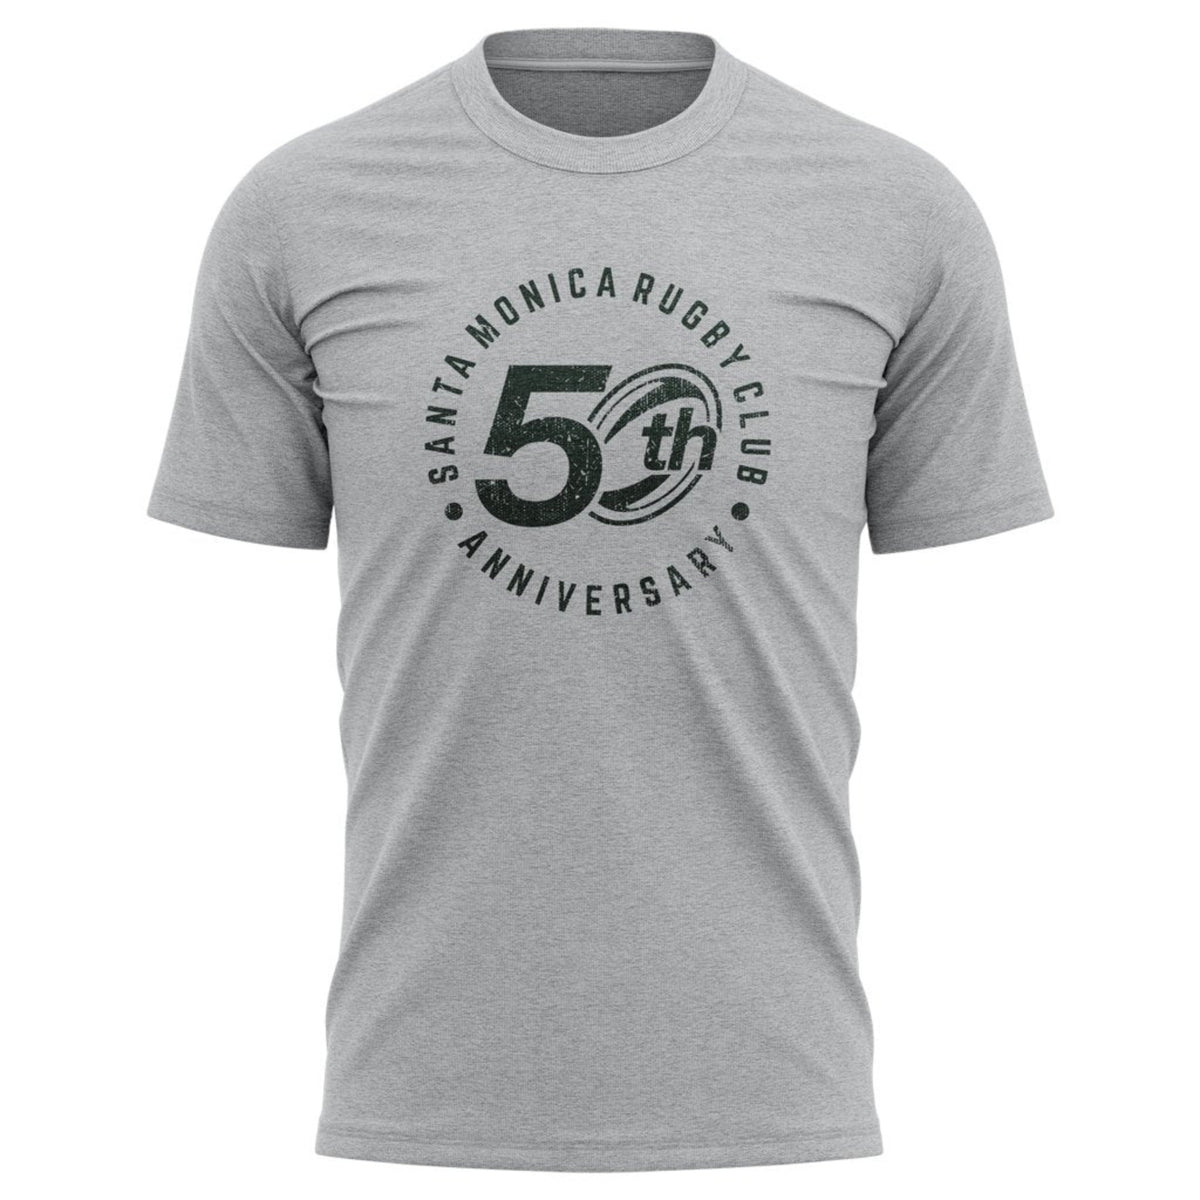 Santa Monica Rugby Club &quot;50th Anniversary&quot; Tee - Youth Black or Grey - www.therugbyshop.com www.therugbyshop.com YOUTH / ATHLETIC GREY / S SANMAR TEES Santa Monica Rugby Club &quot;50th Anniversary&quot; Tee - Youth Black or Grey